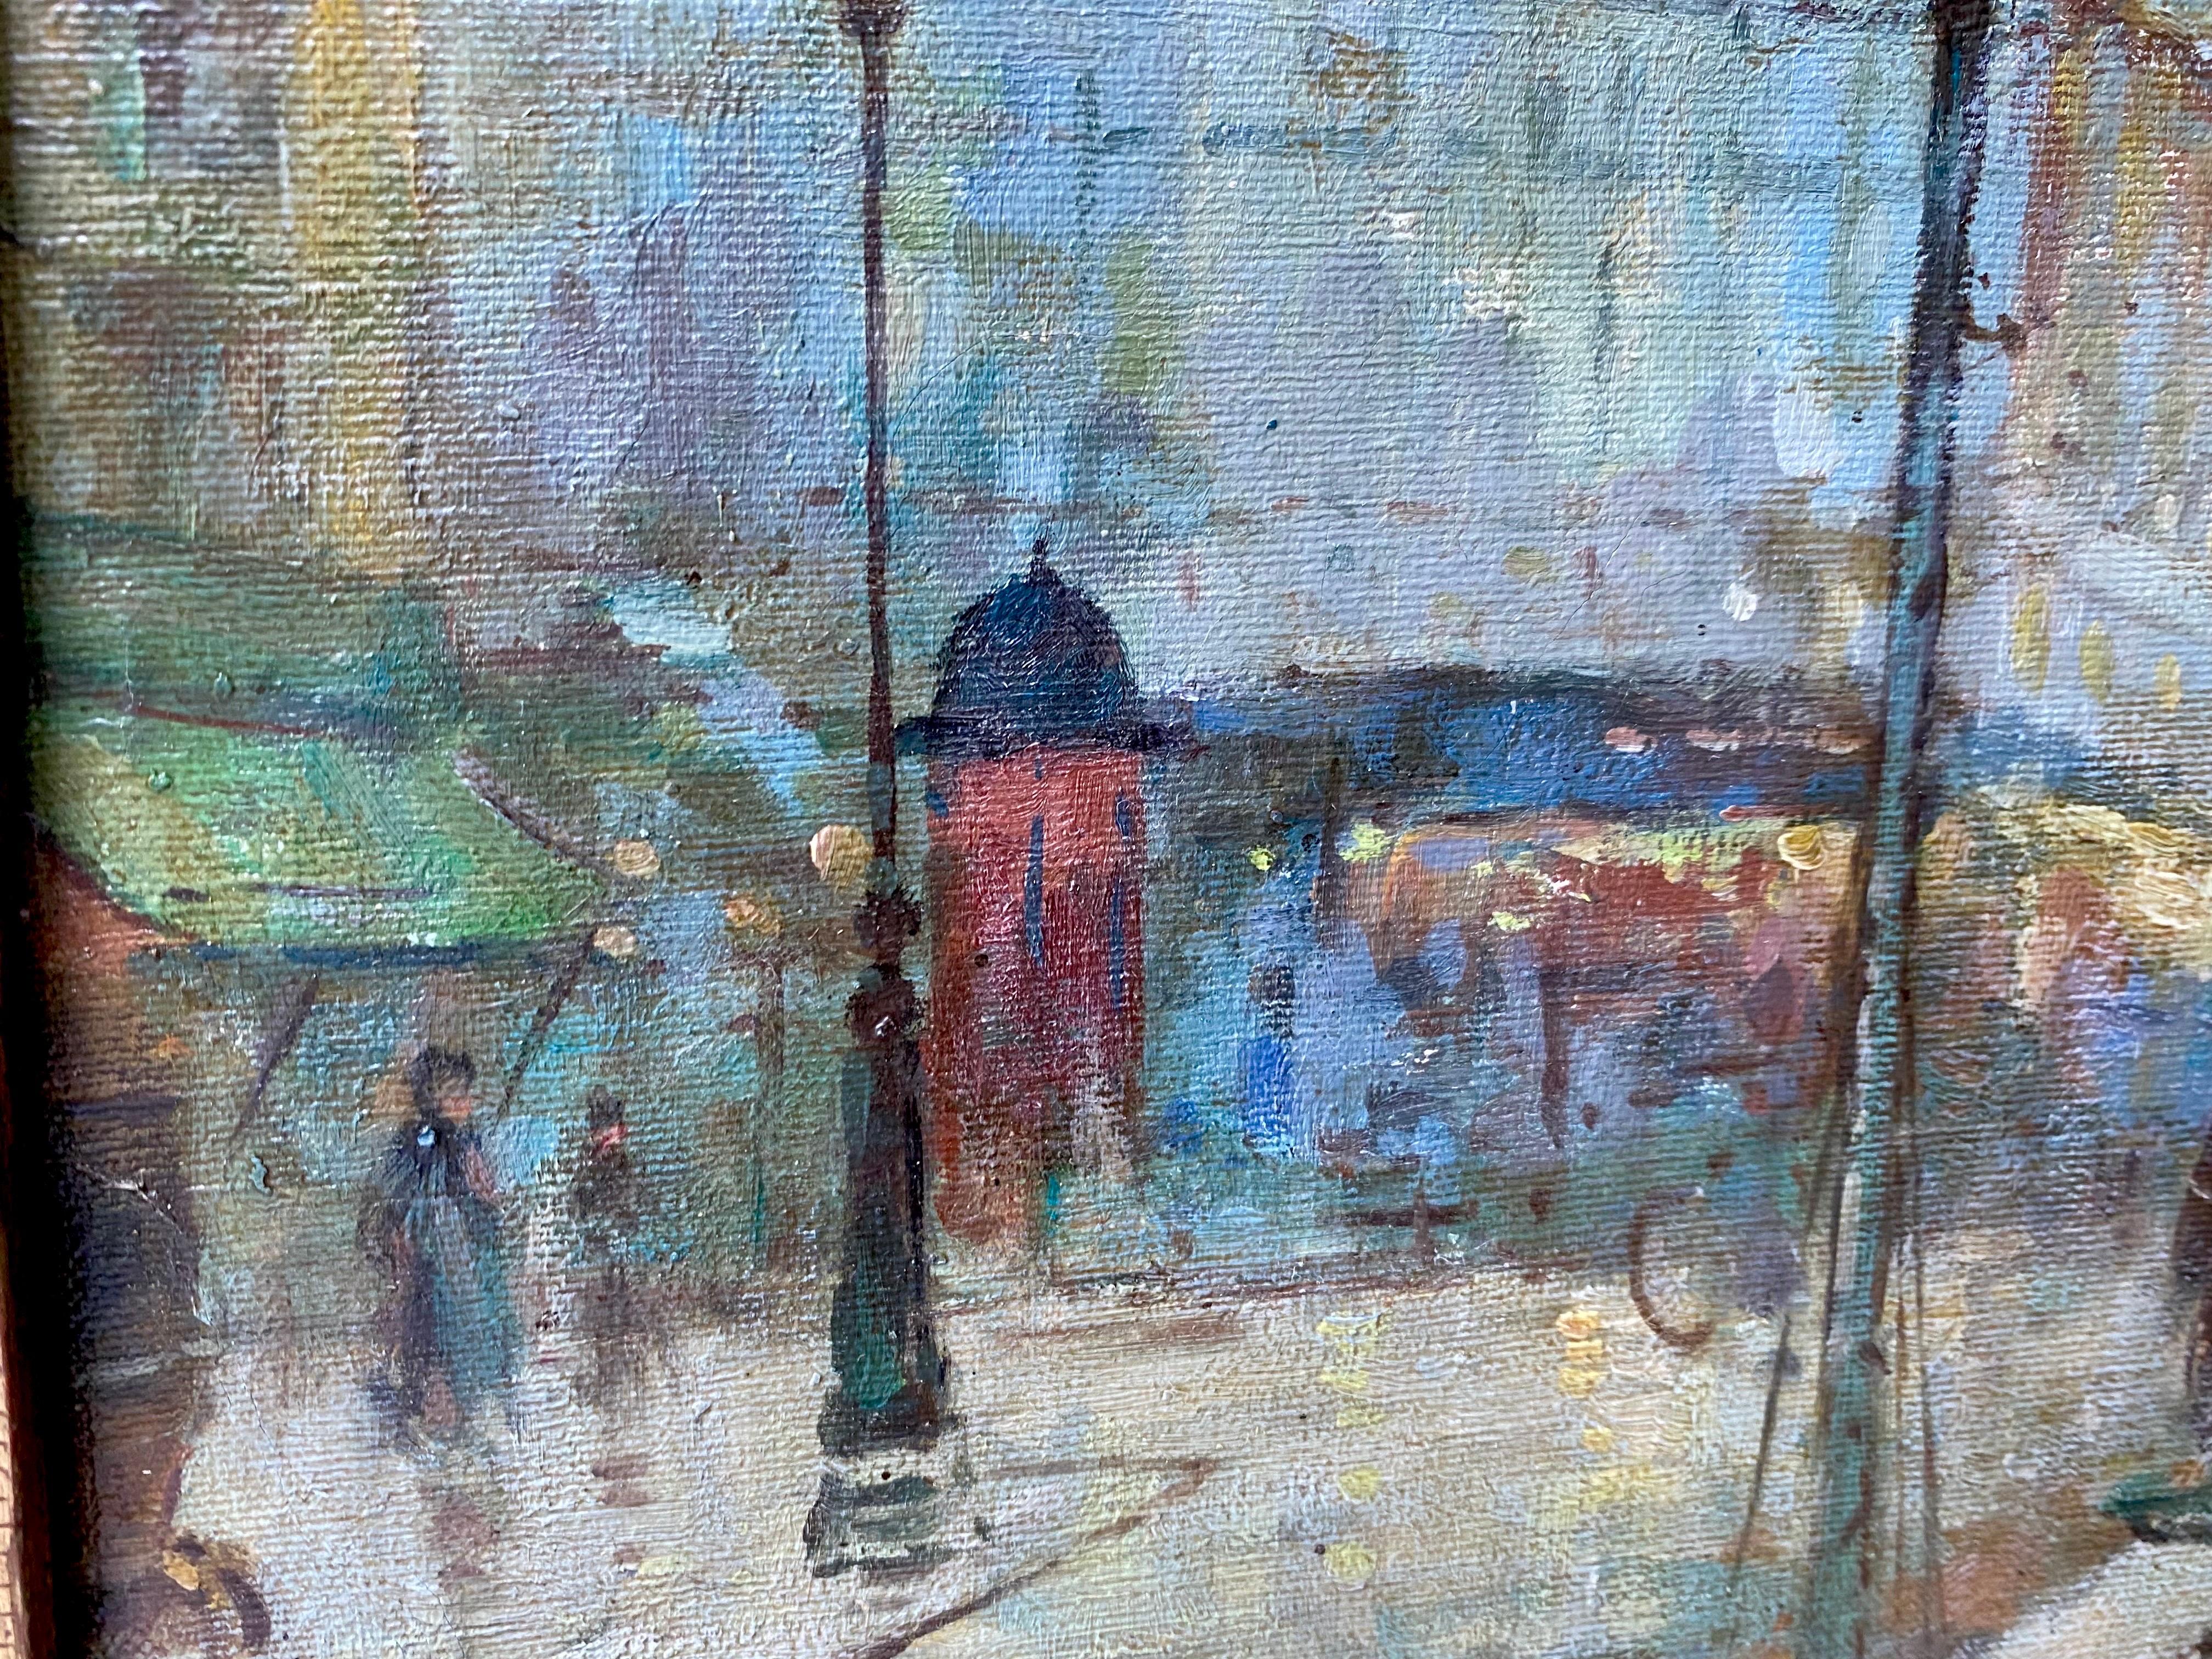 Large 19th century style French impressionist cityscape - Flower market Paris - Impressionist Painting by Unknown